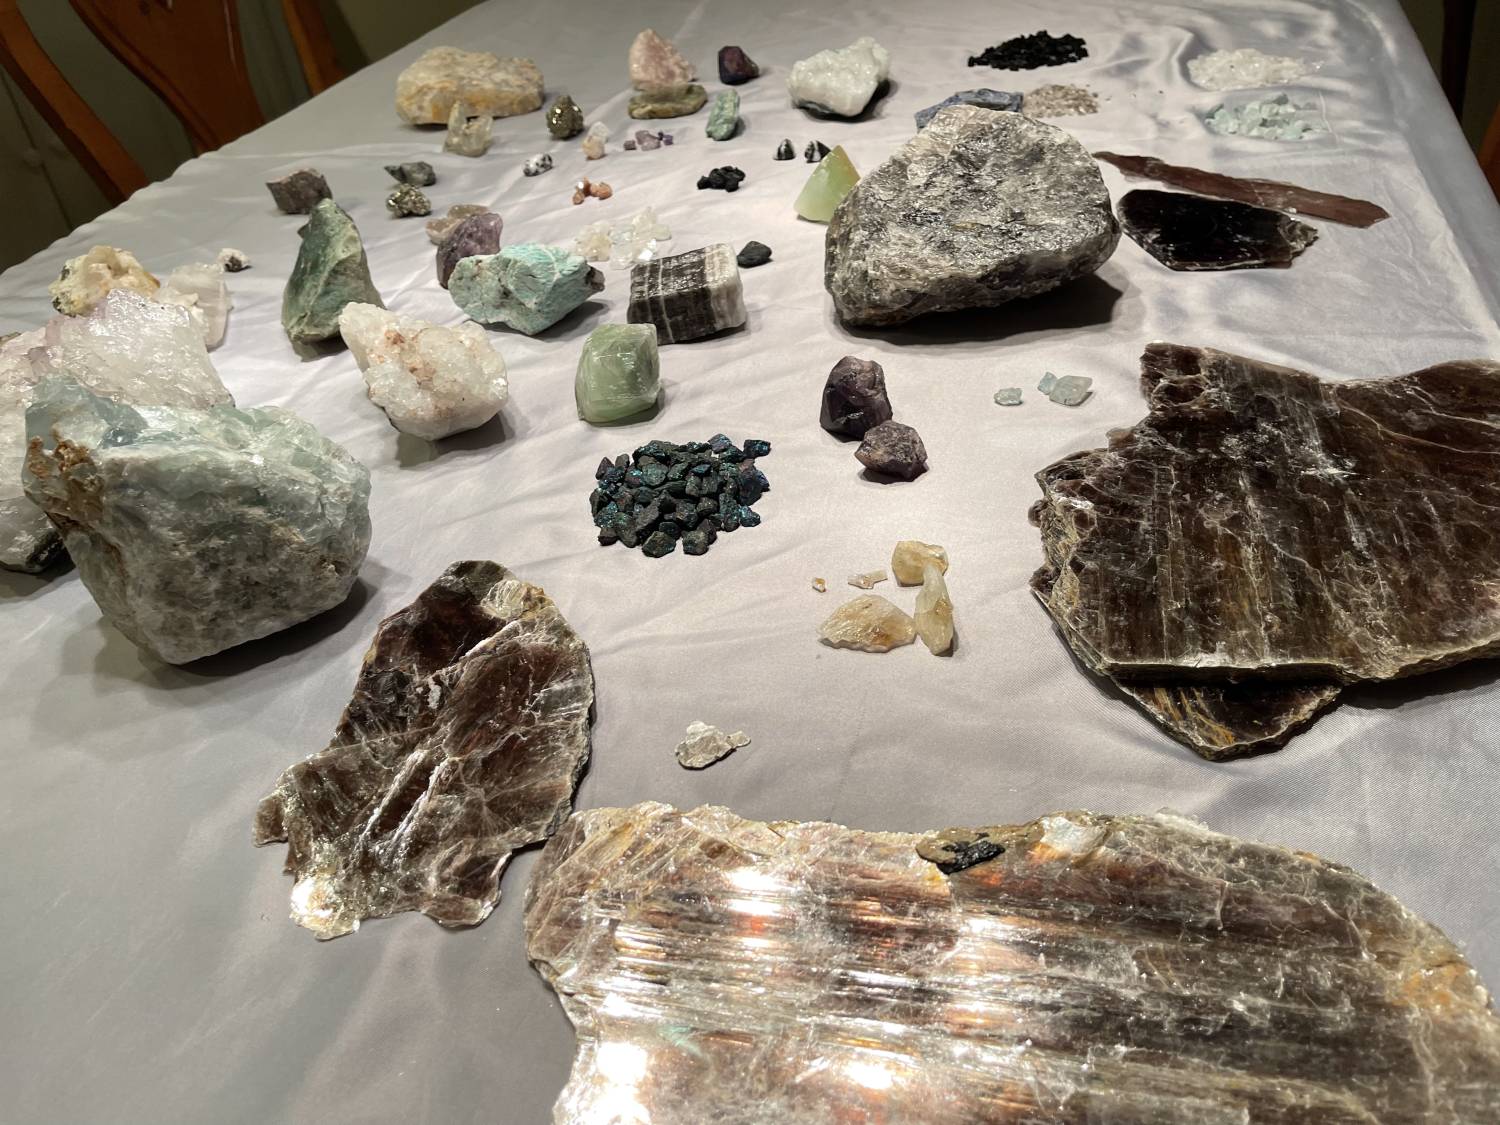 Photograph of a table with minerals and gems of varying shapes, colors, and sizes.